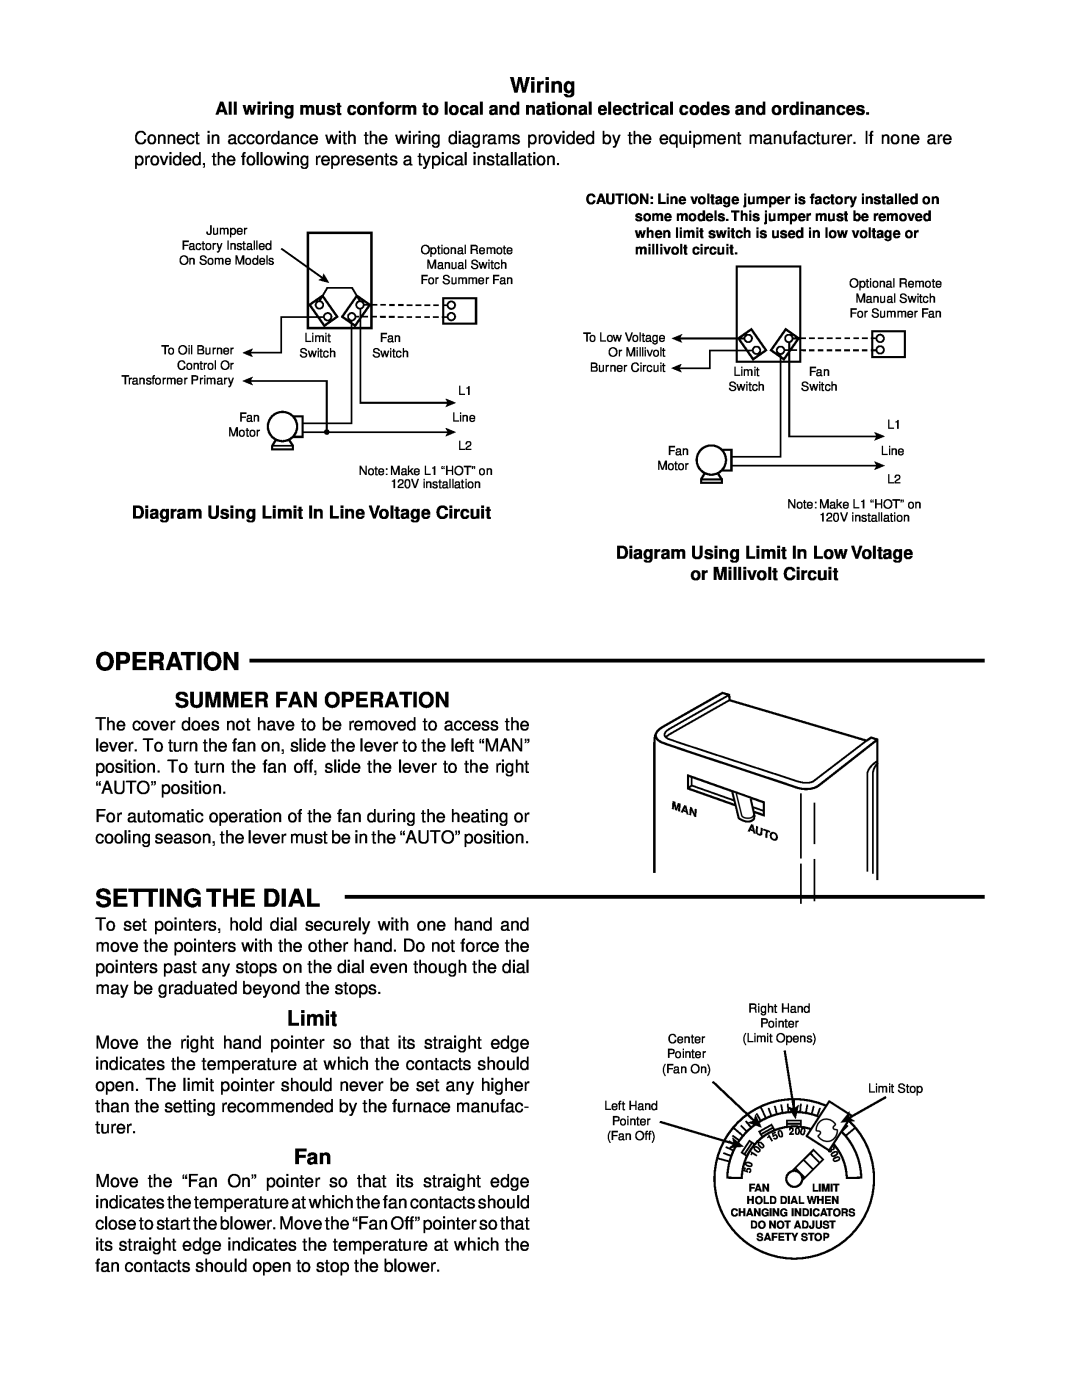 White Rodgers 5D51-35, 5D51-90, 5D51-78 installation instructions Setting The Dial, Wiring, Summer Fan Operation, Limit 